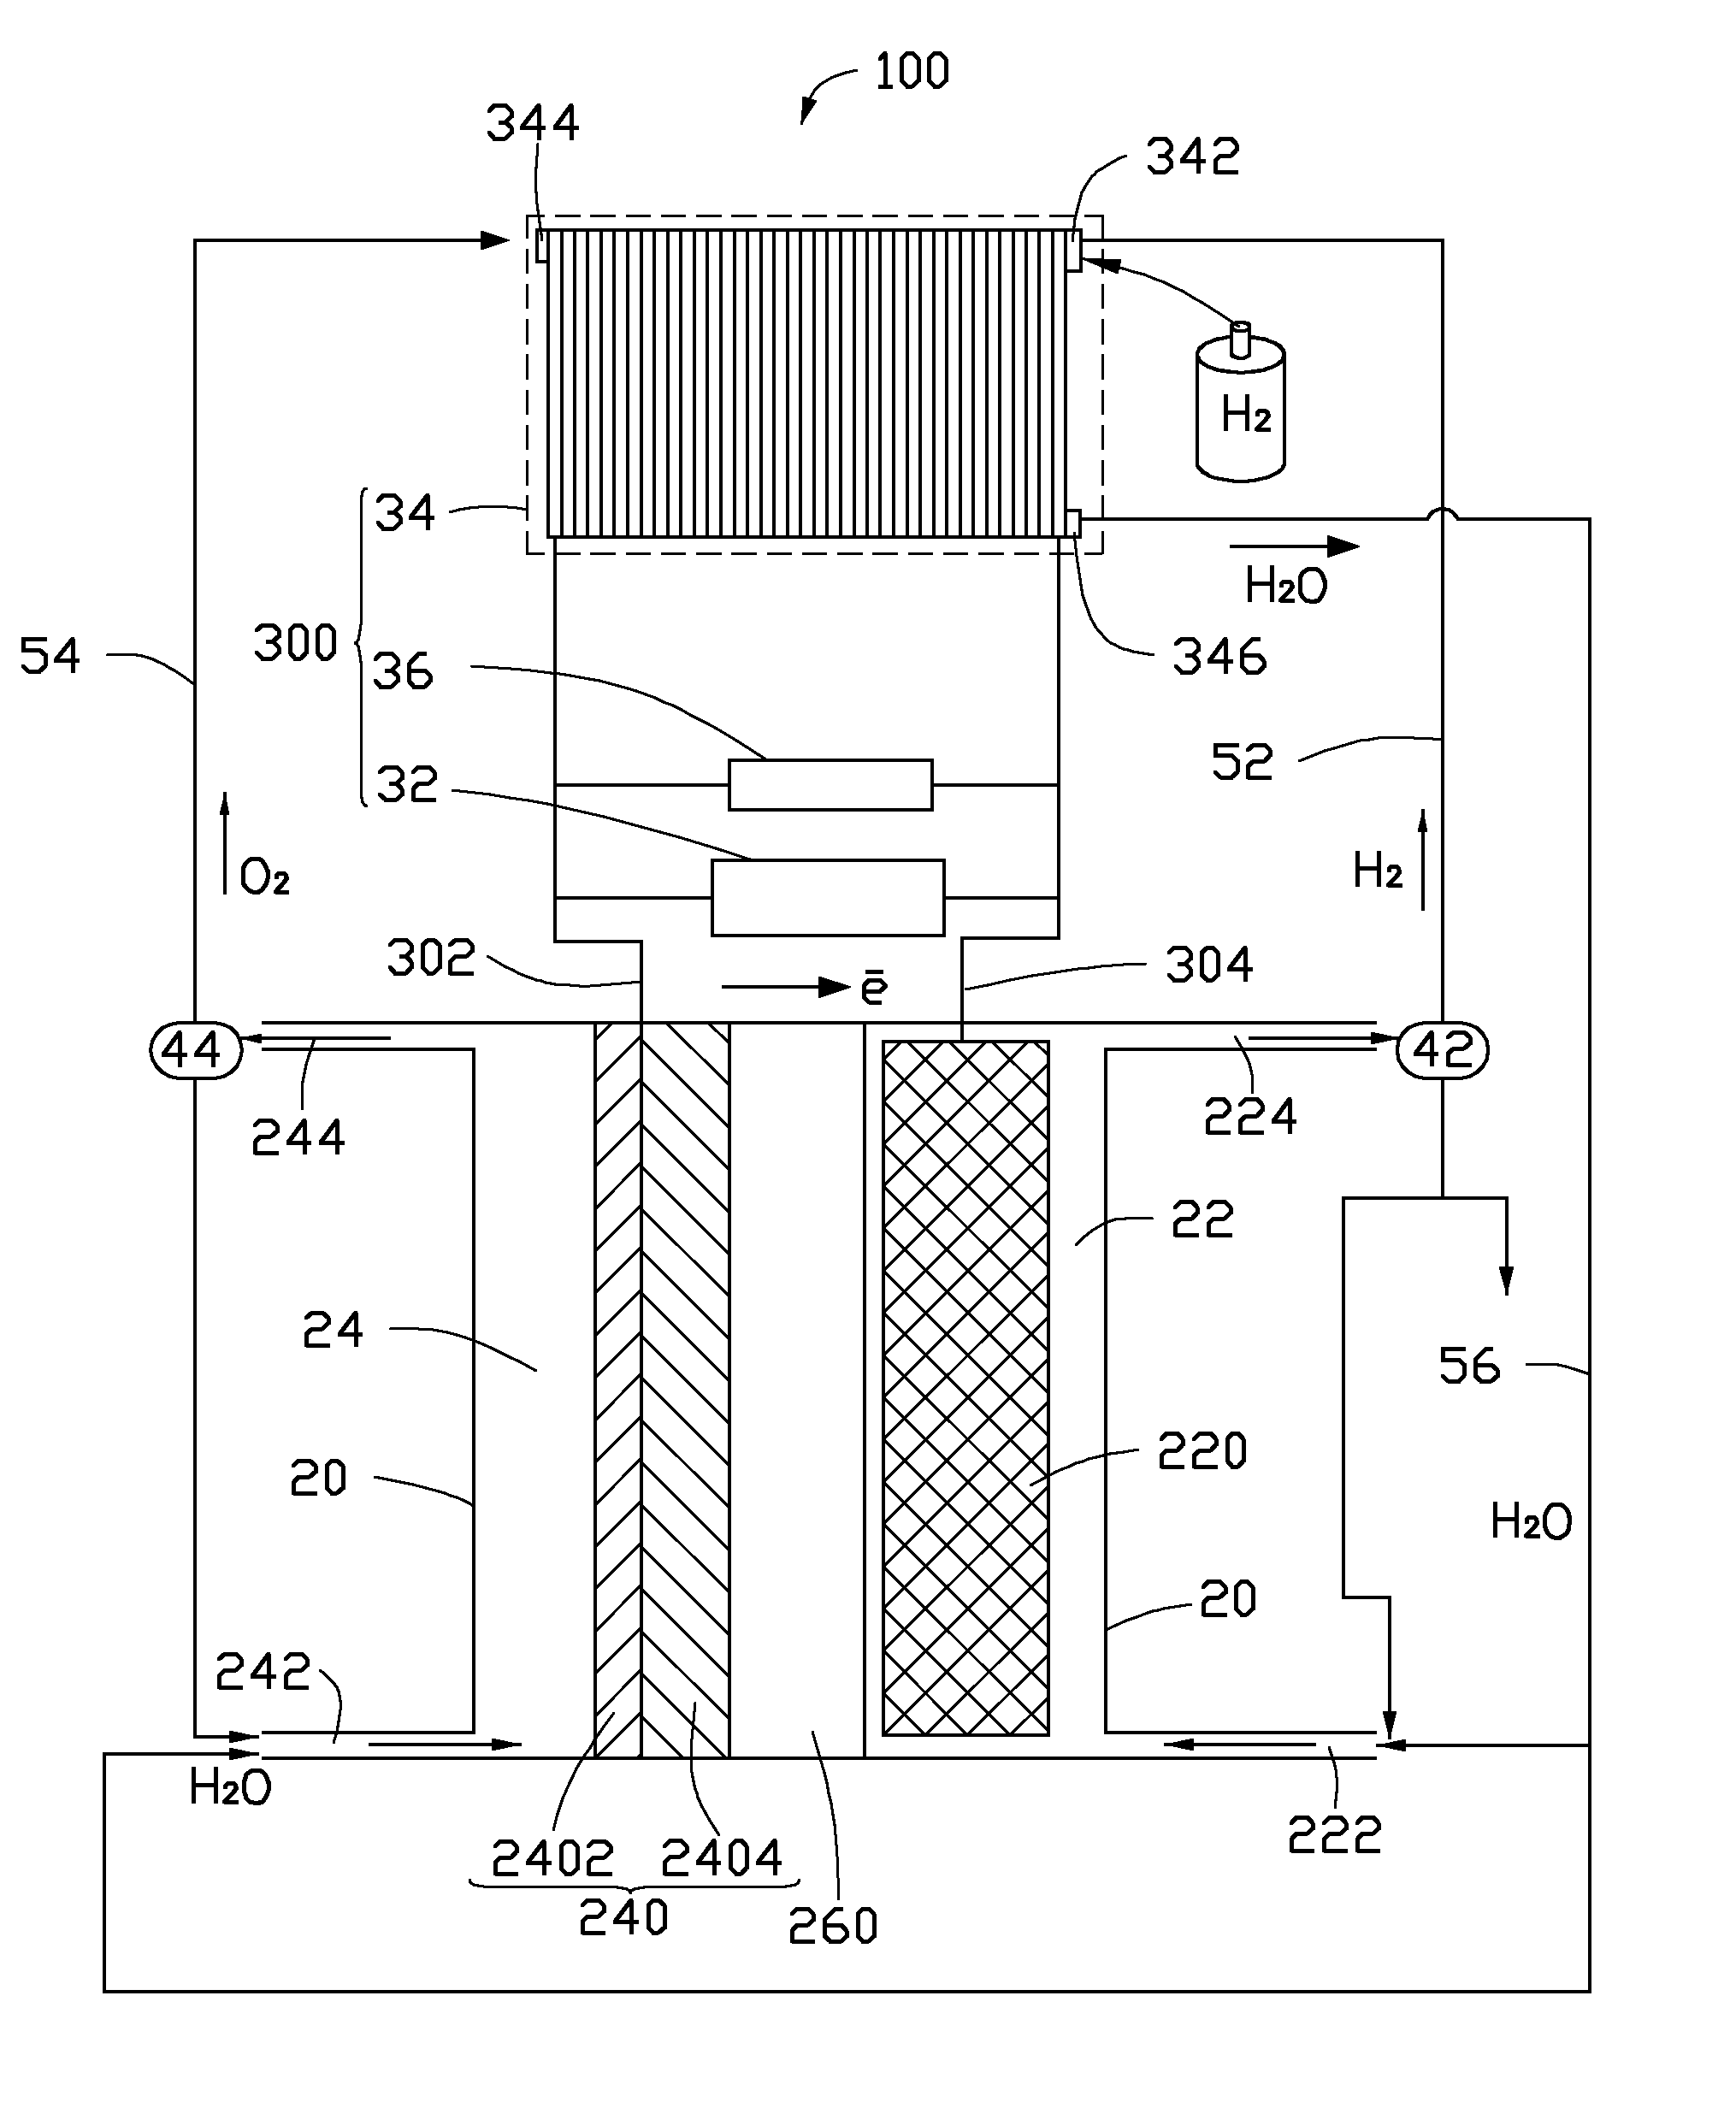 Method for electrochemically converting carbon dioxide